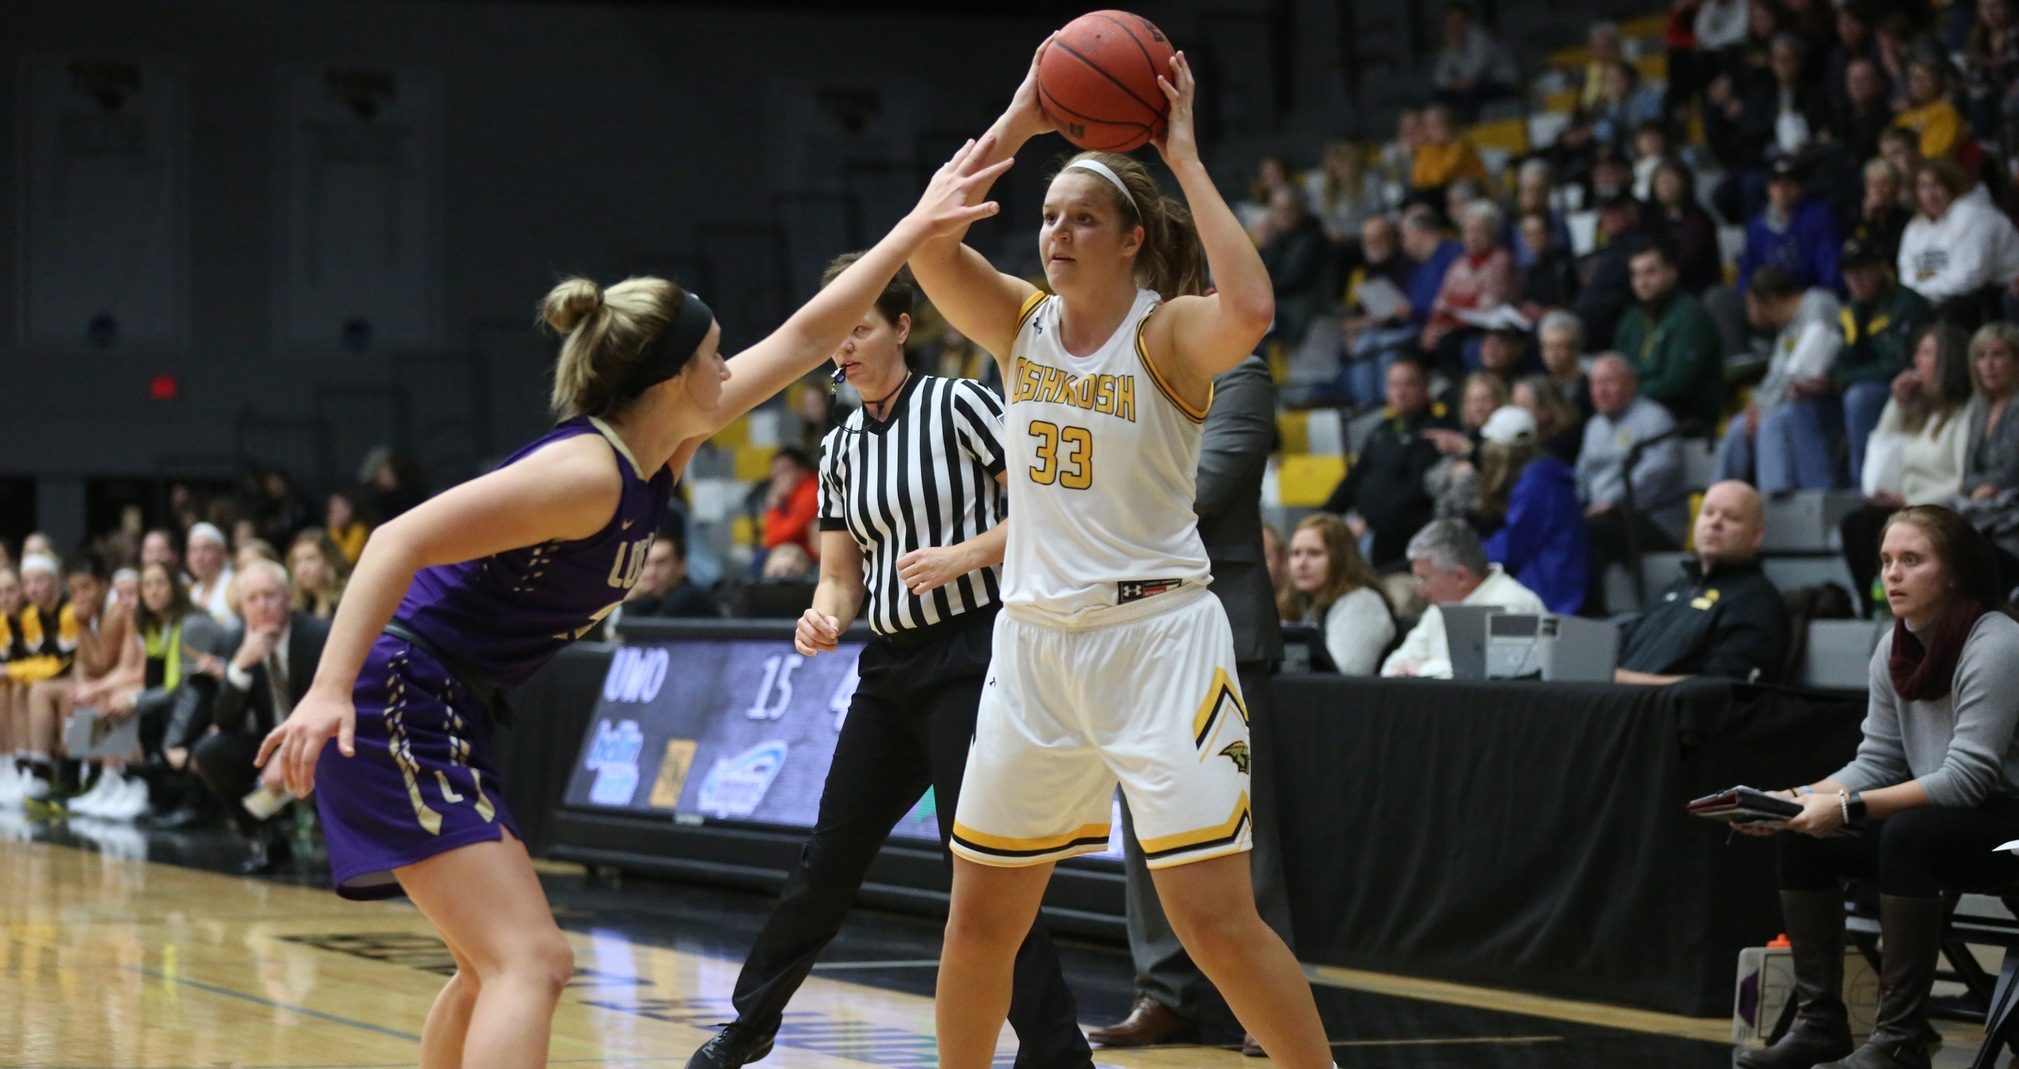 Nikki Arneson tallied 10 points against the Pioneers for her second straight double-digit scoring performance.